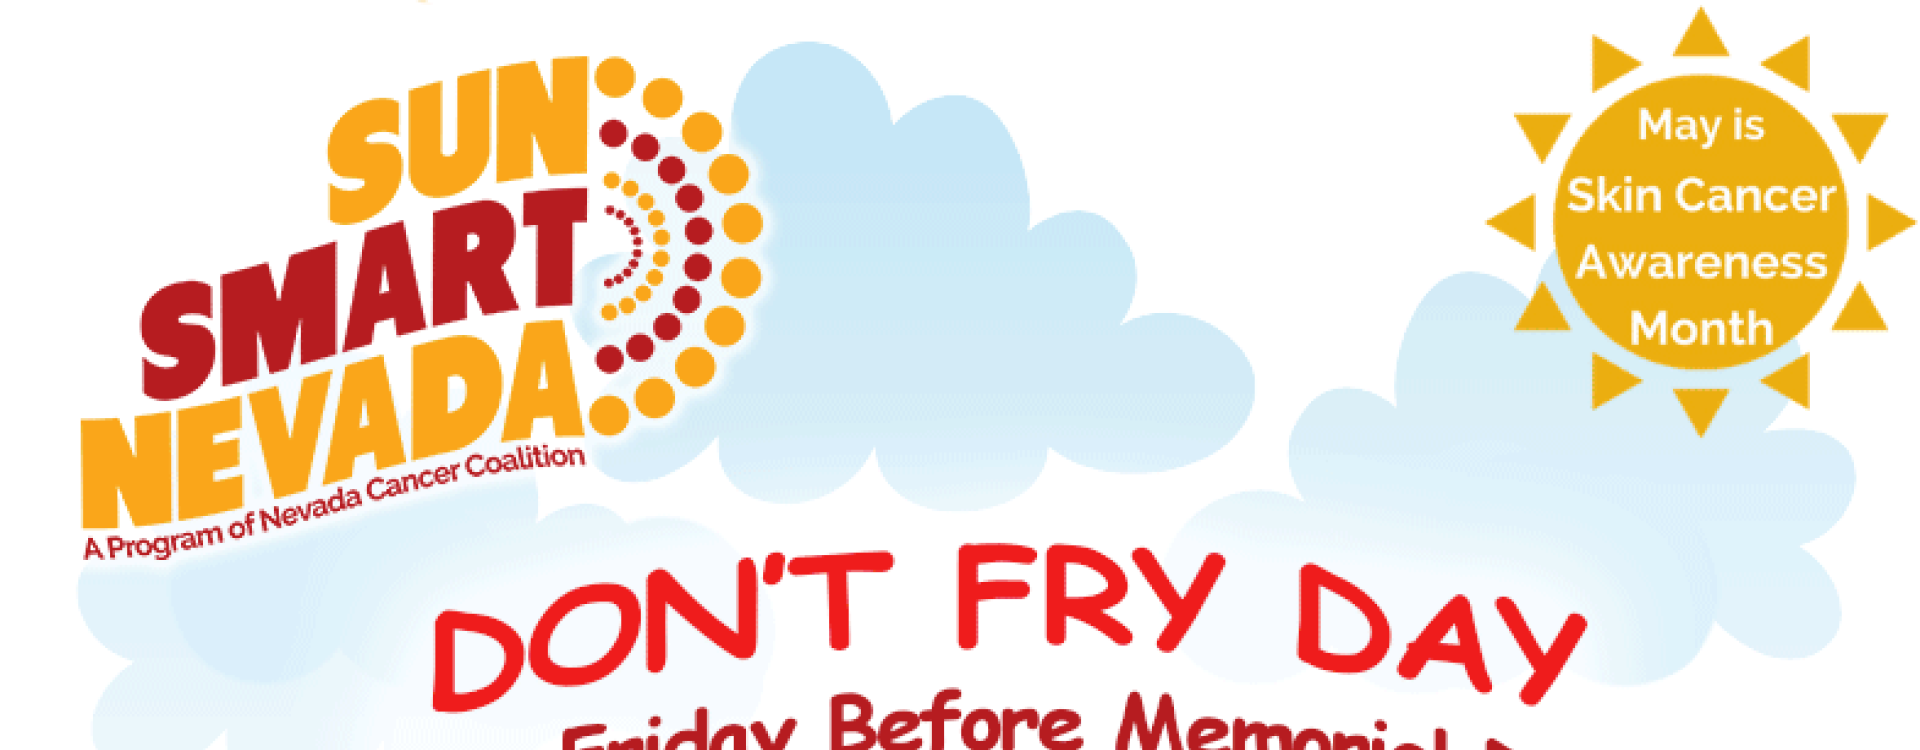 Don't Fry Day...Reminding You To Wear Sunscreen Nevada Cancer Coalition